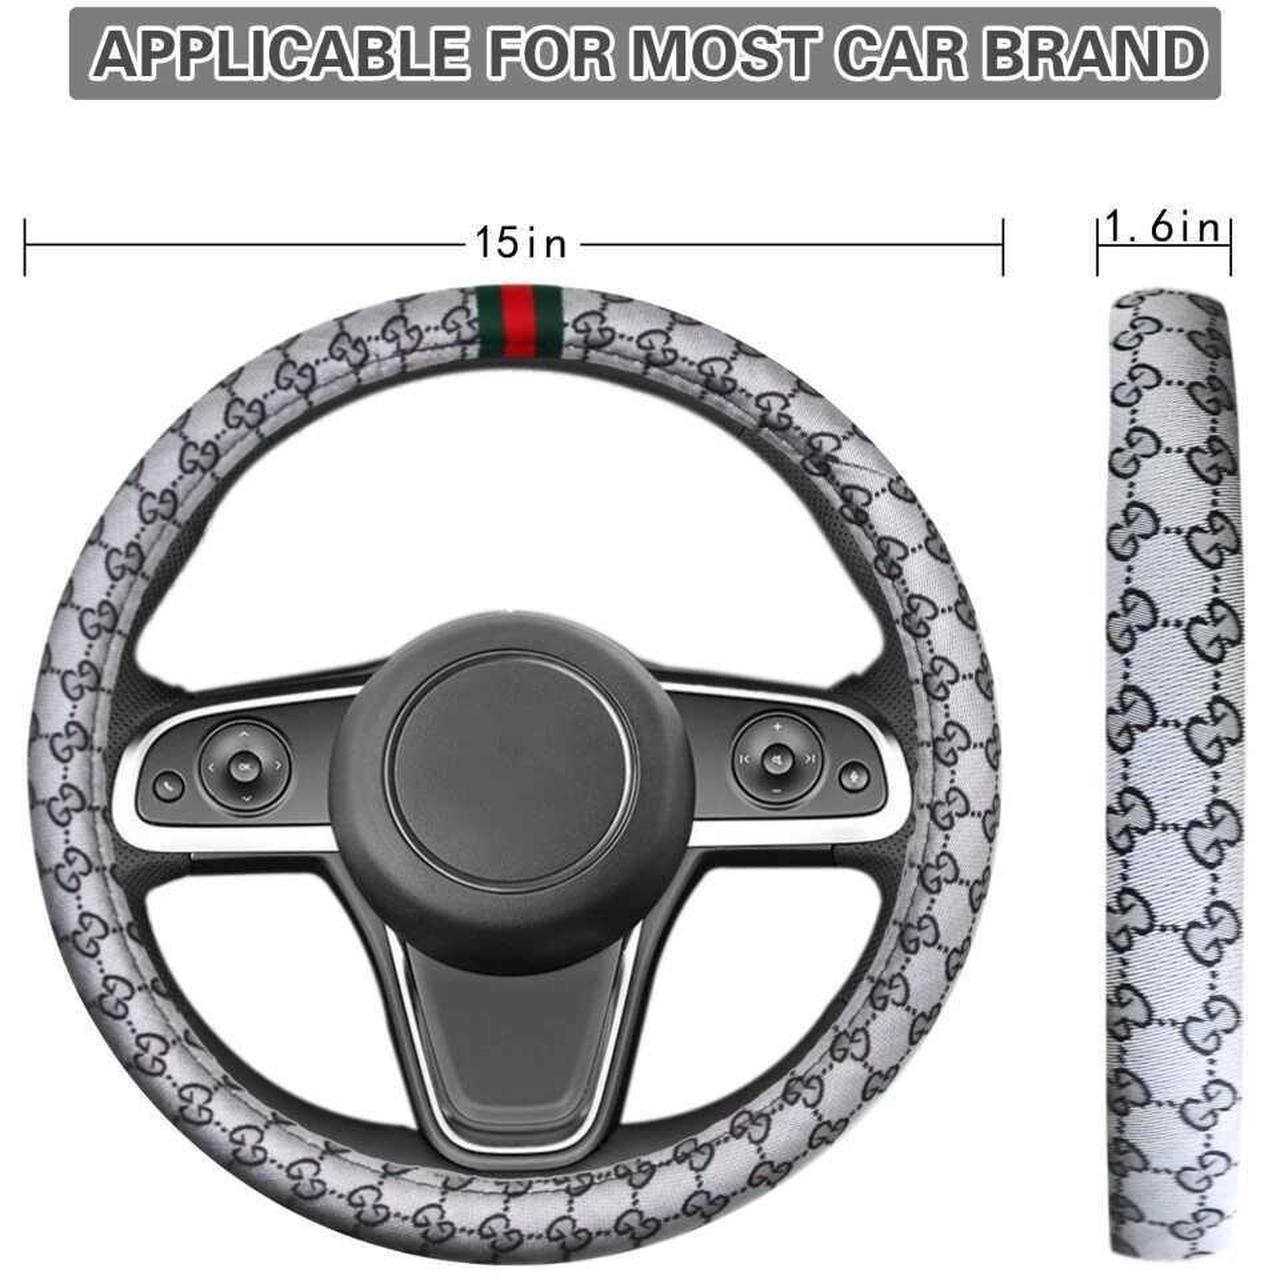 Gucci Steering Wheel Cover Hotsell -  1696123838